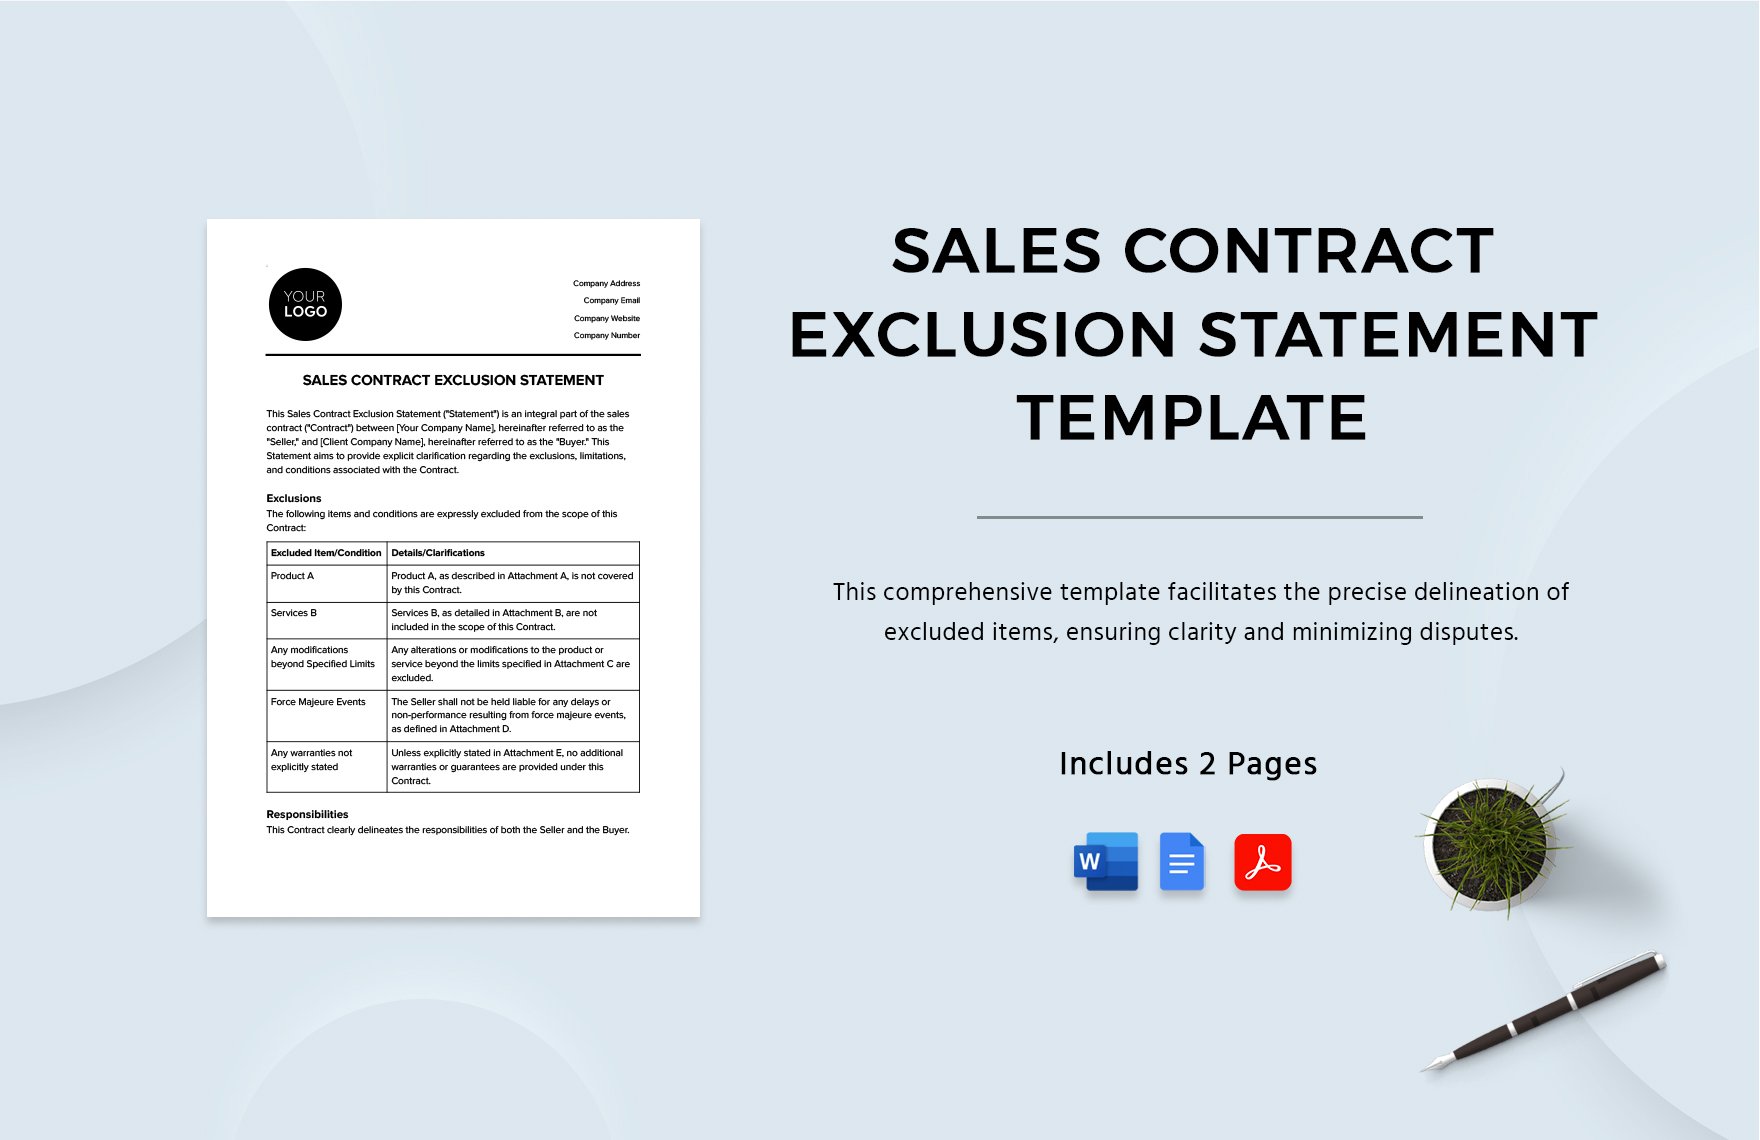 Sales Contract Exclusion Statement Template in Word, Google Docs, PDF